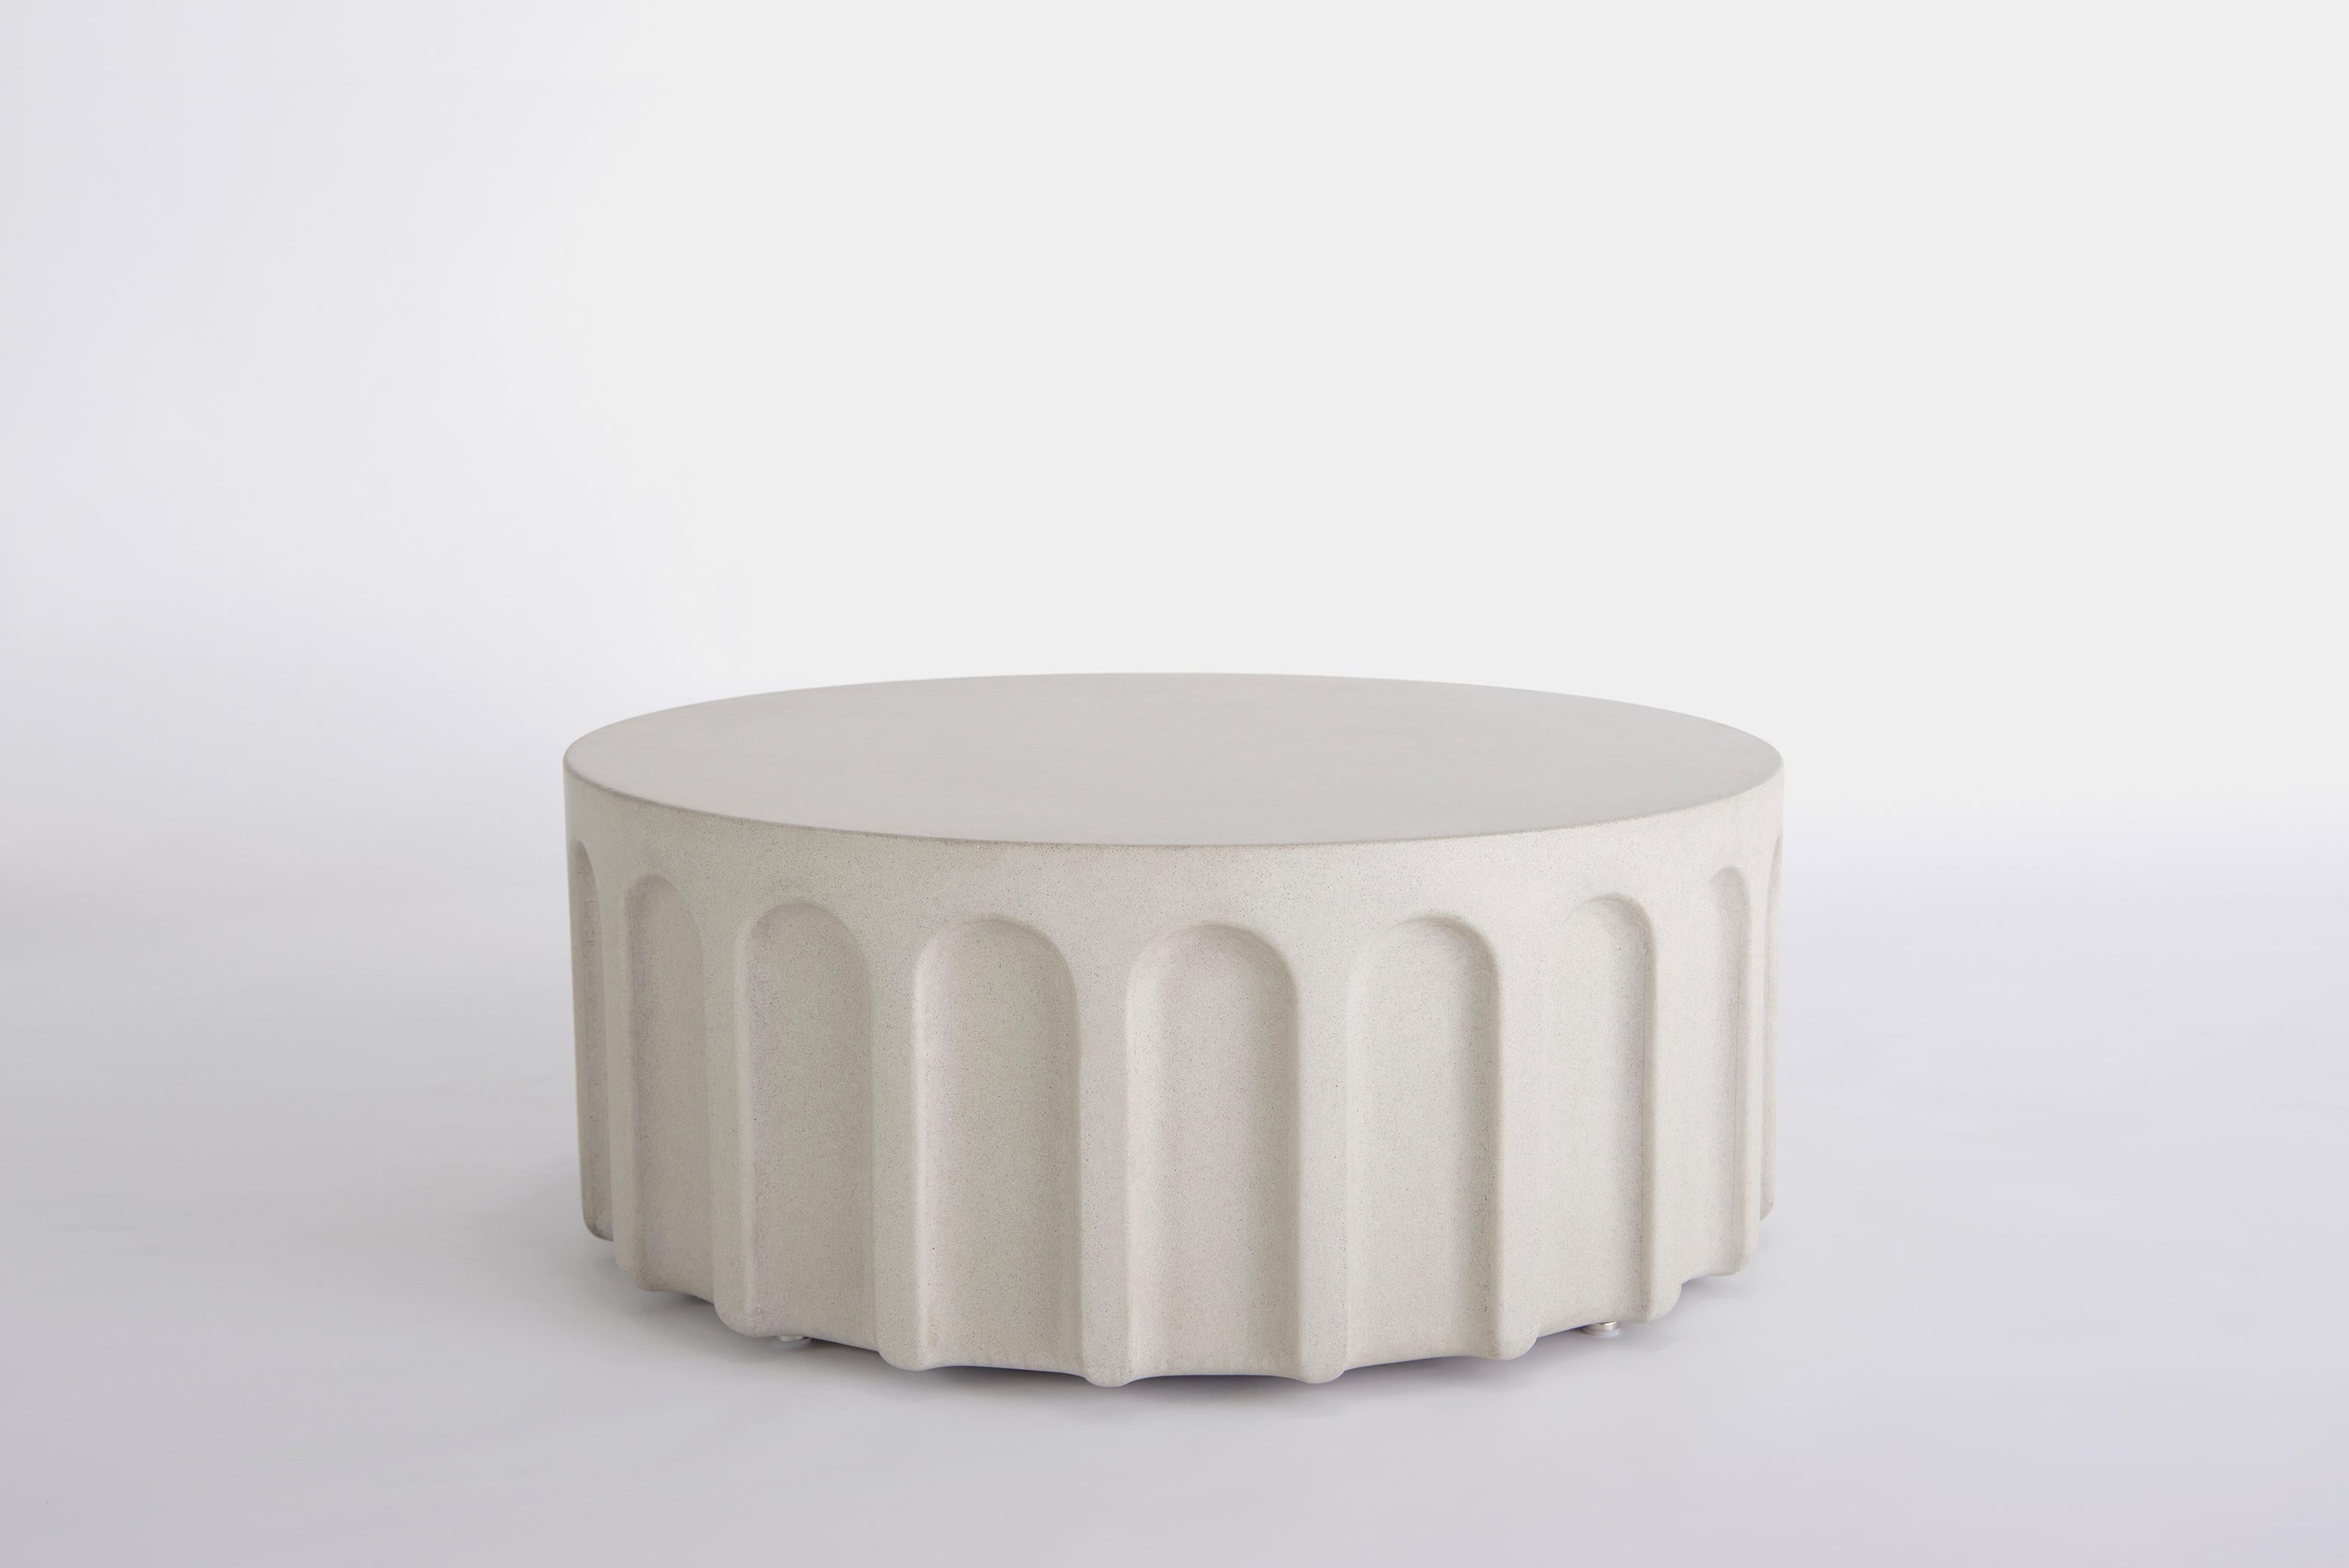 Forum Coffee Table by Phase Design
Dimensions: Ø 88,9 x H 33,02 cm. 
Materials: Glass fiber reinforced concrete base.

Reinforced concrete. Suitable for indoor and outdoor applications. Available in chalk, fog, madrone, and obsidian. Please contact